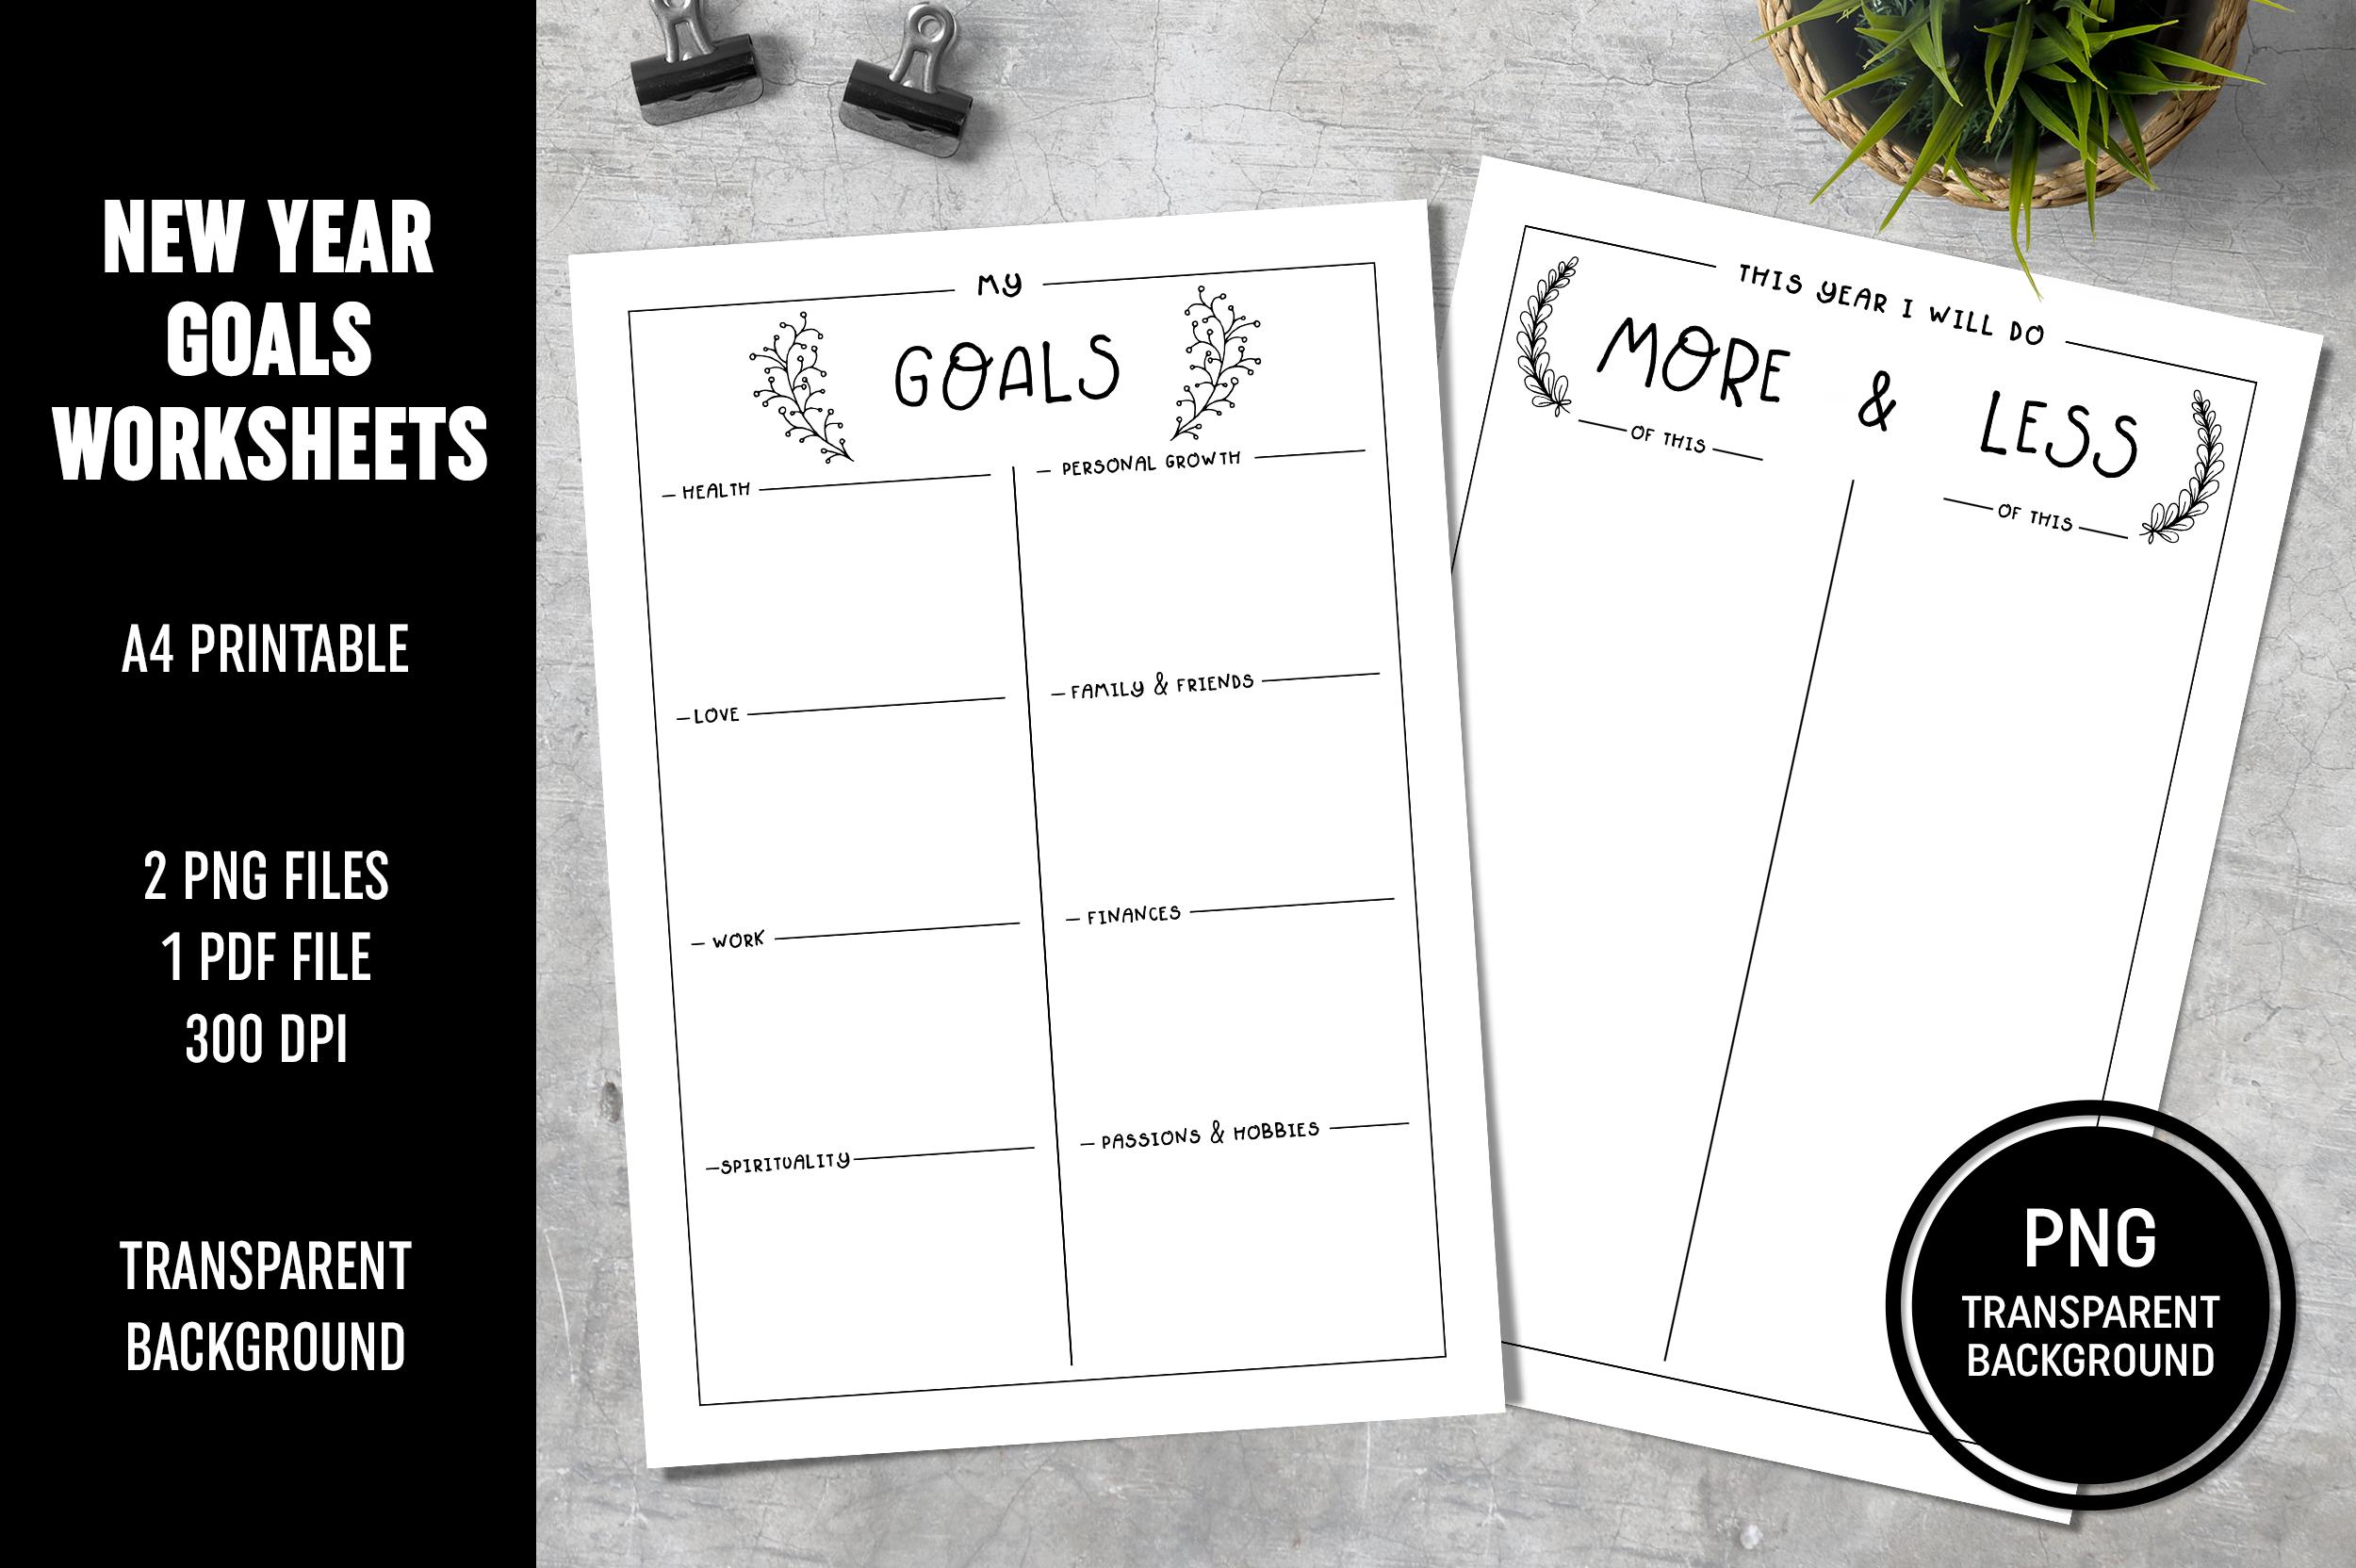 New Year Goals Worksheets A4